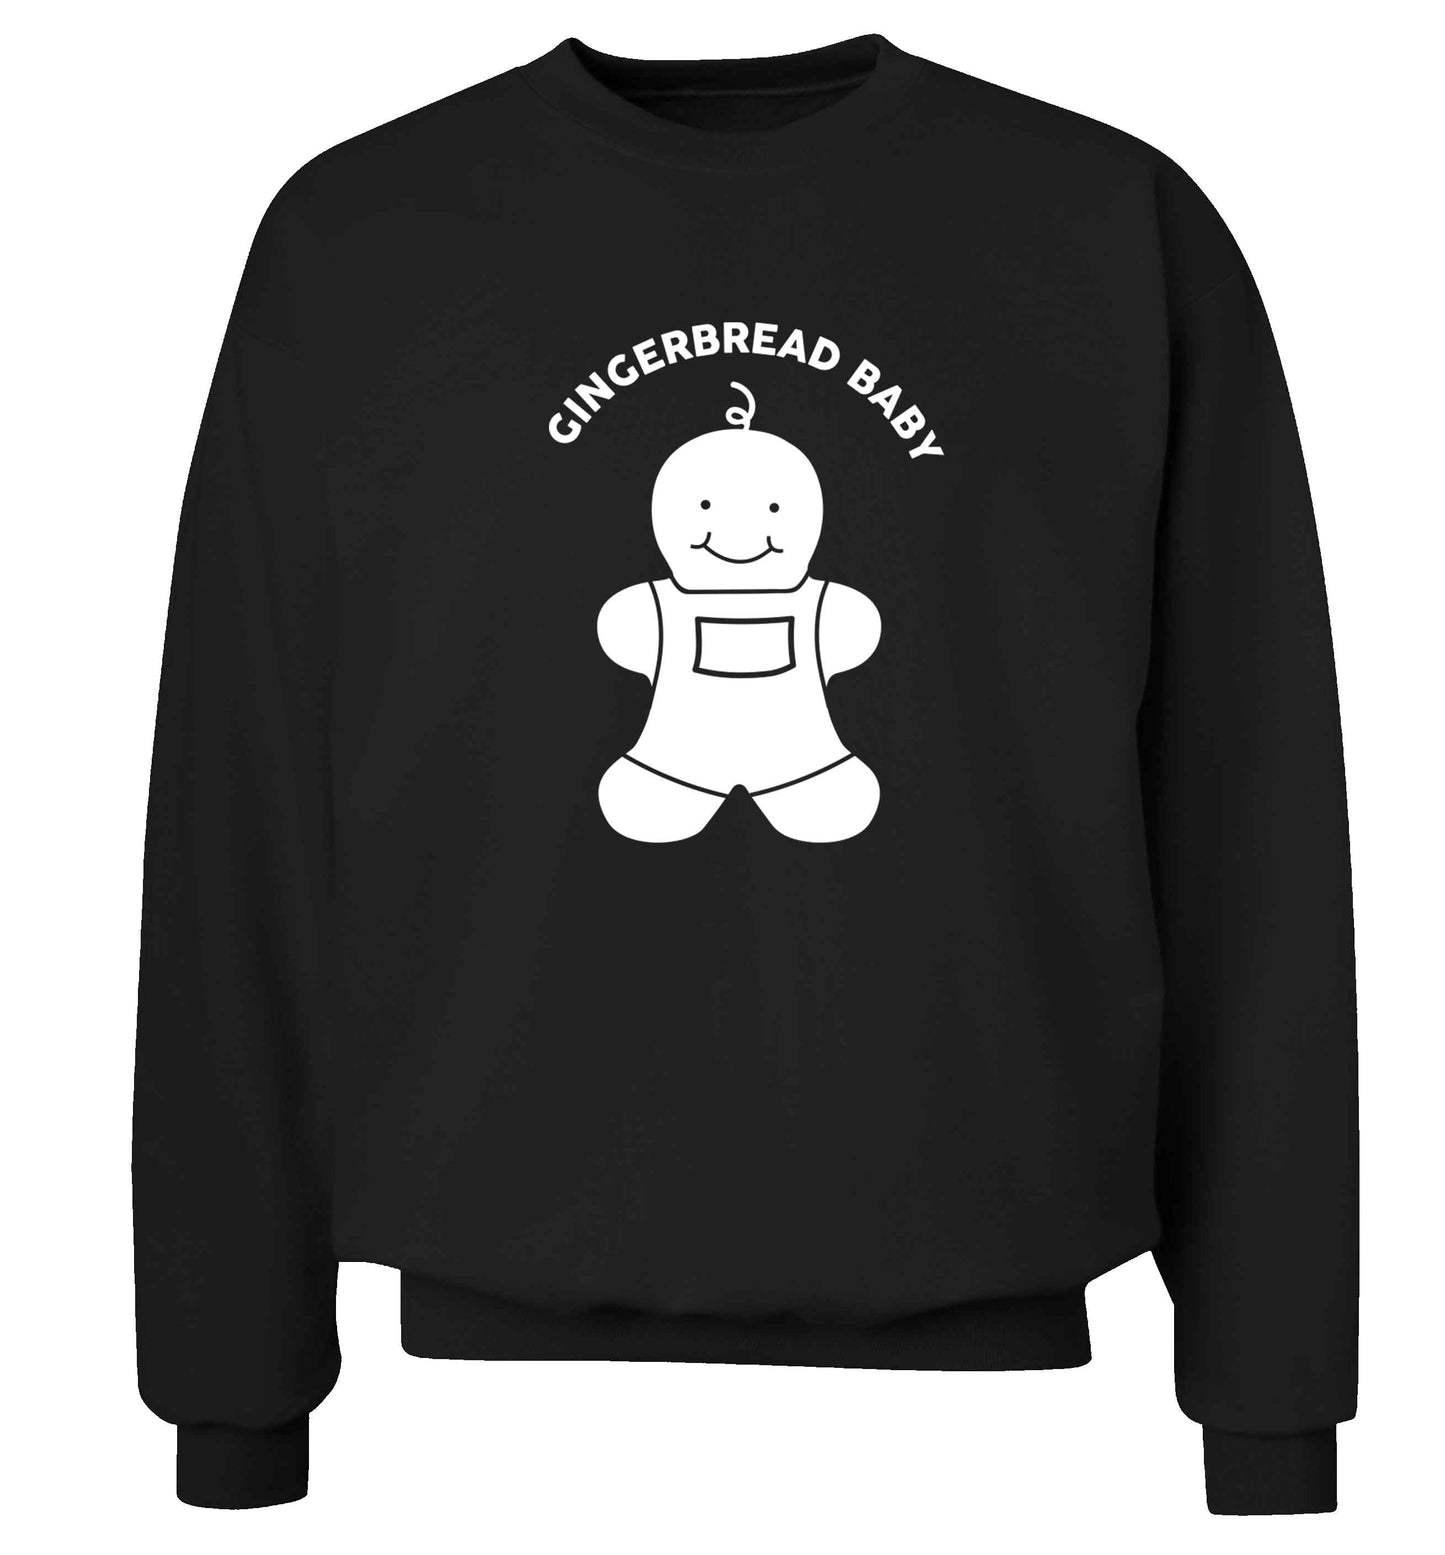 Gingerbread baby adult's unisex black sweater 2XL